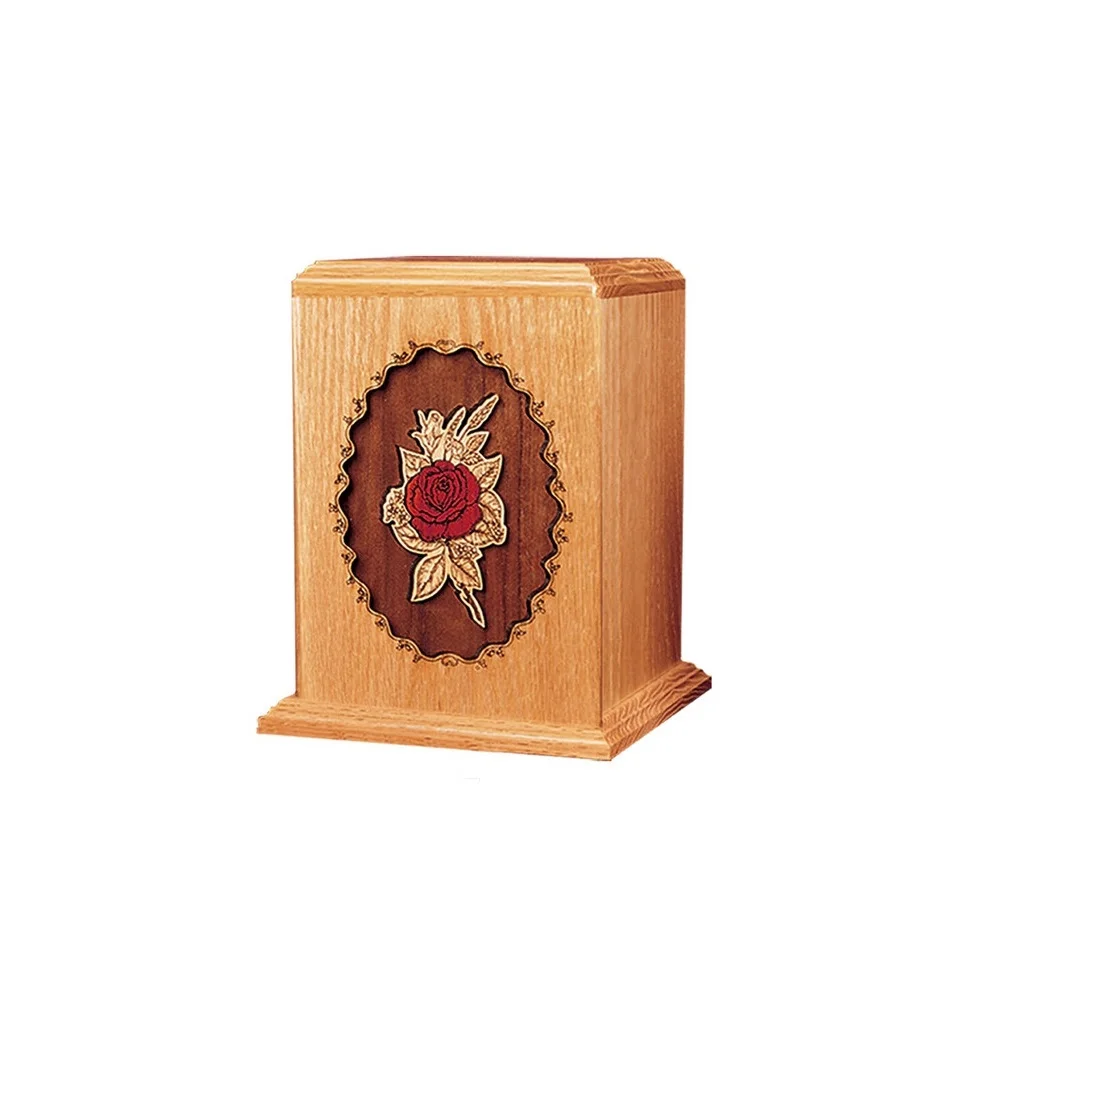 Standard quality wooden cremation urns for human ashes funeral urn wood pet urns wooden box customized shape